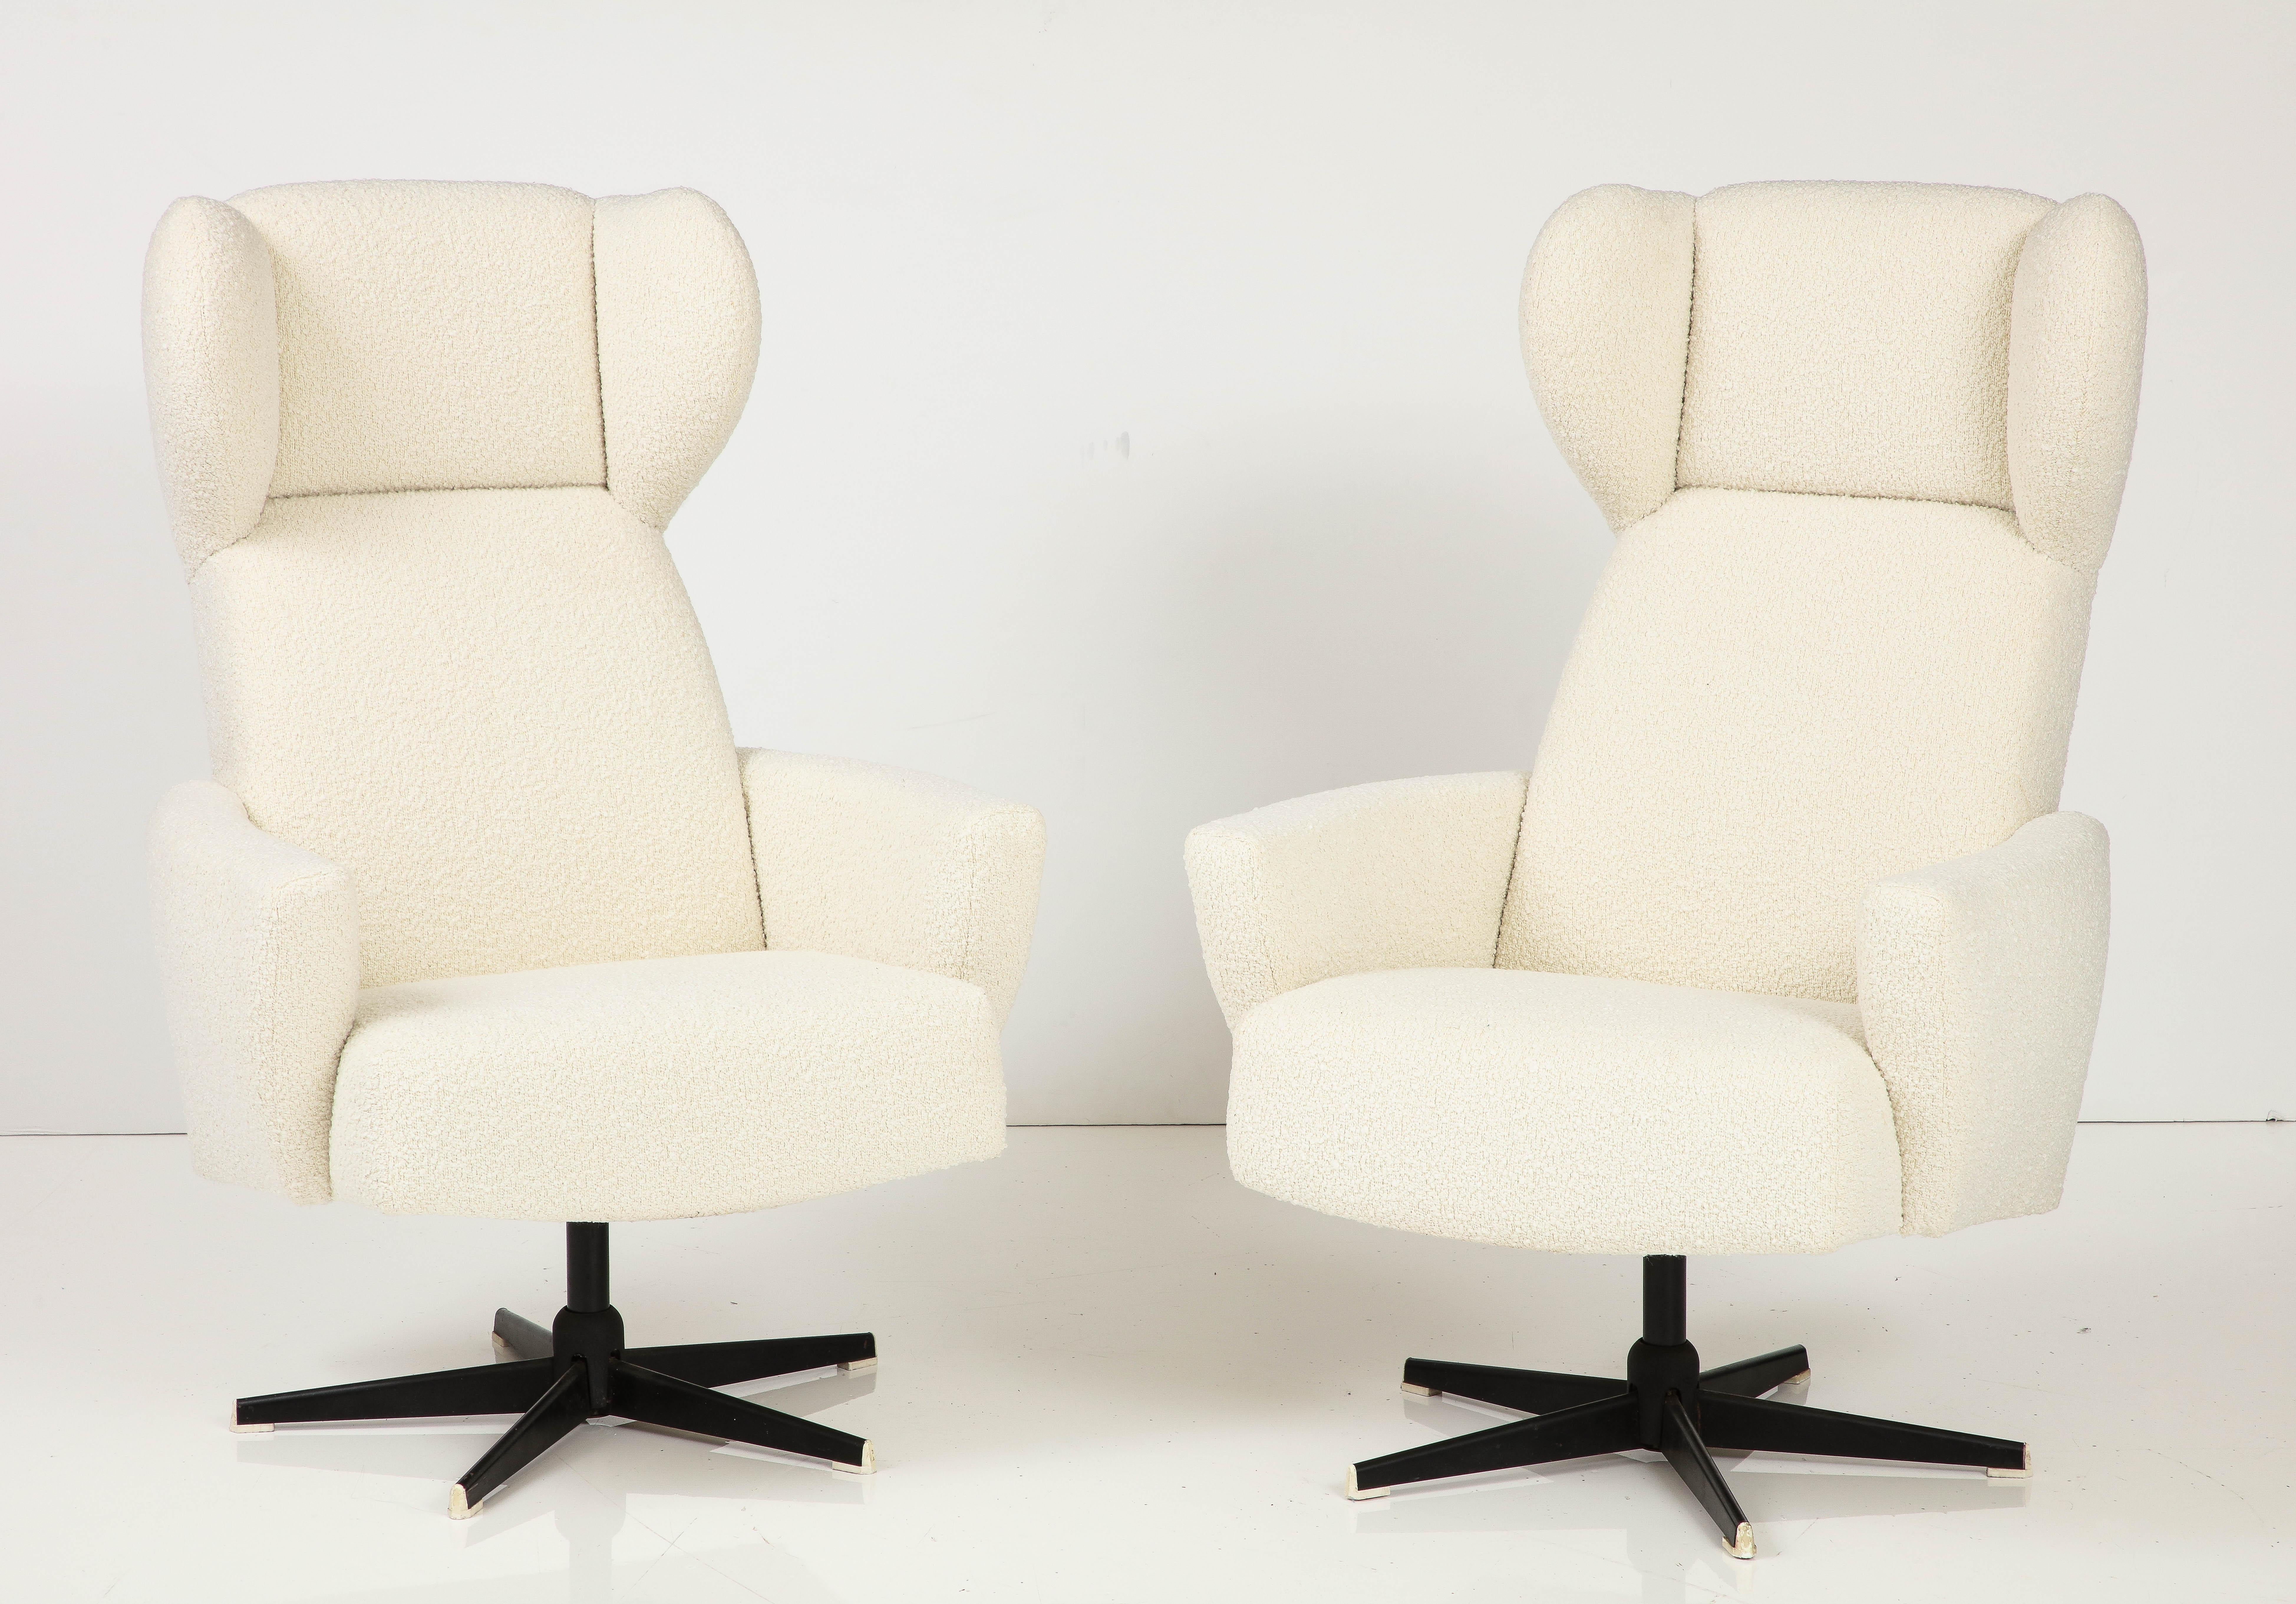 A unique pair of Italian modernist high-back swivel chairs, circa 1960. Highly sculptural and futuristic, they would make for a great addition to a living room, office or media room. Very comfortable; newly reupholstered in our professional studio